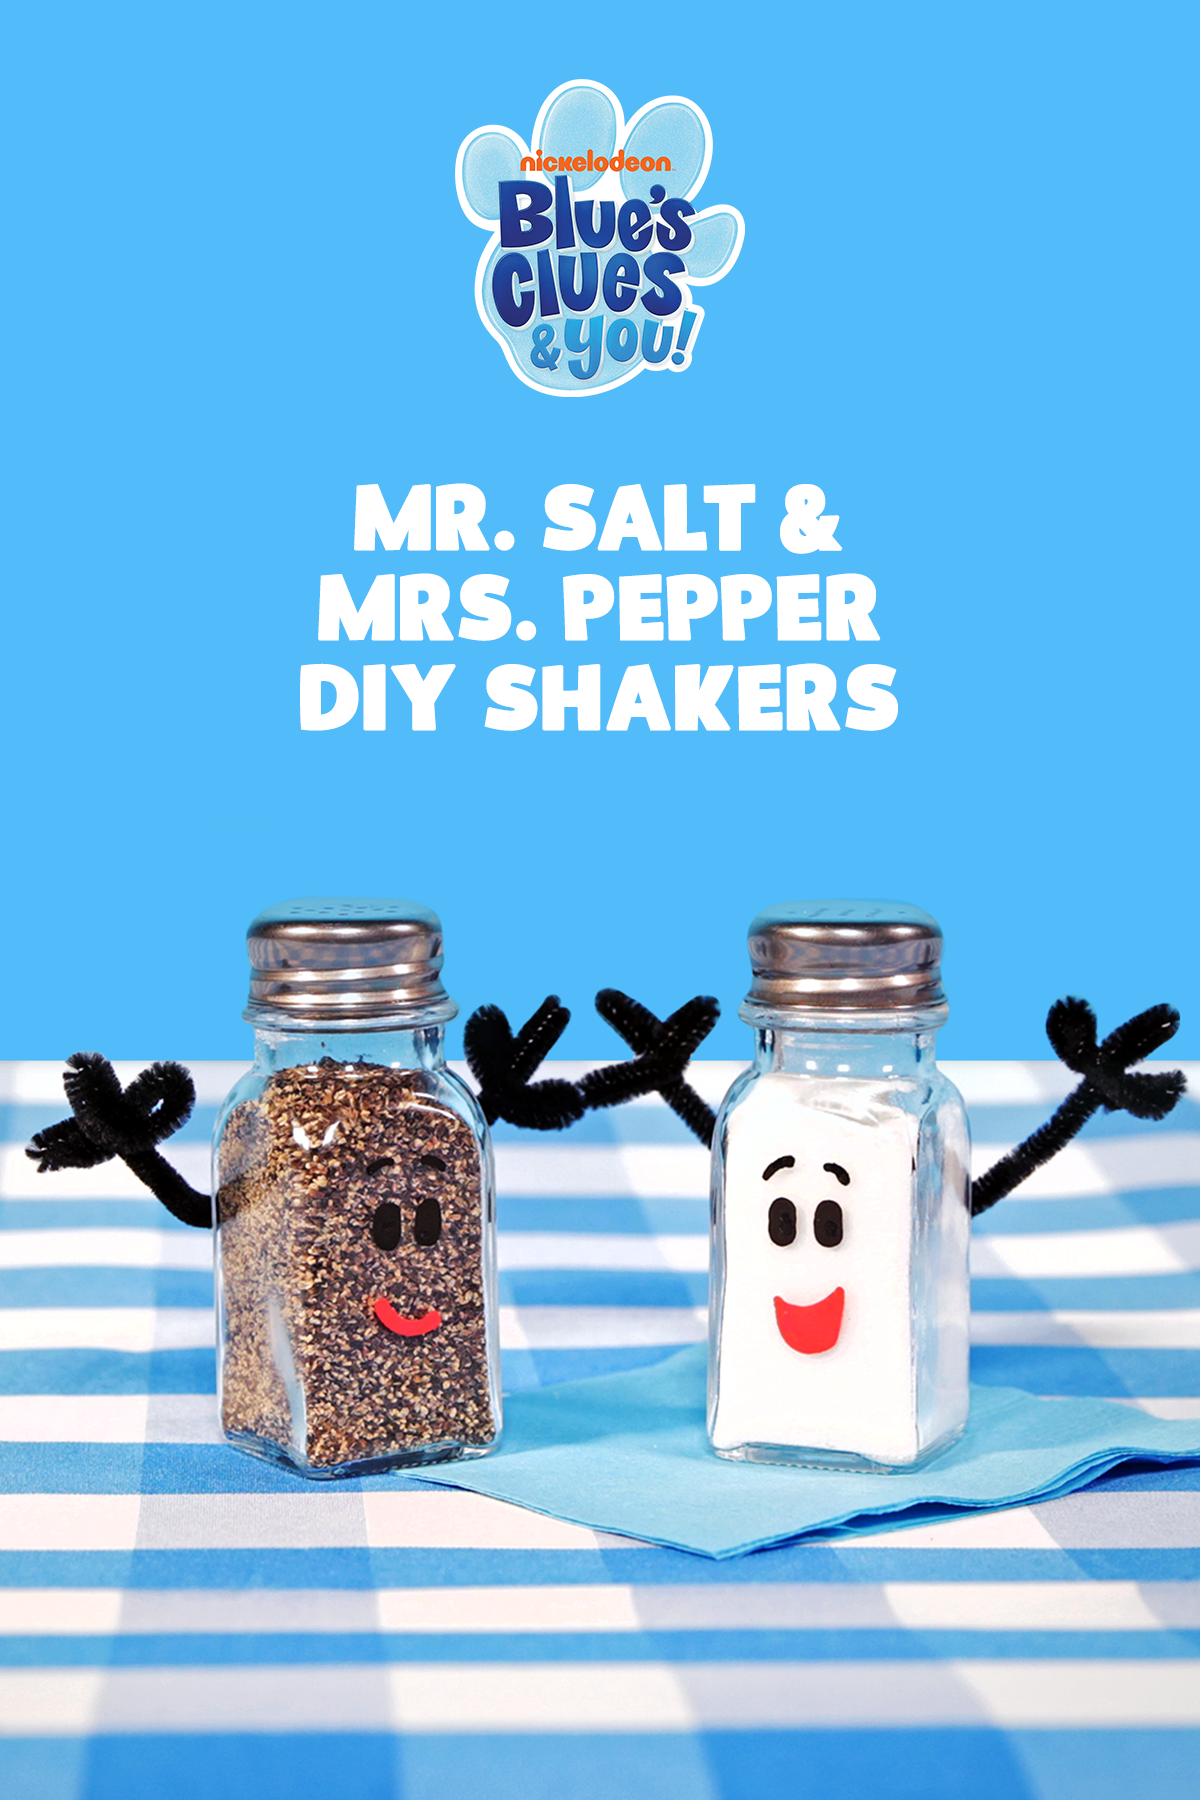 https://www.nickelodeonparents.com/wp-content/uploads/2020/02/BC_Shakers_pinterest.png